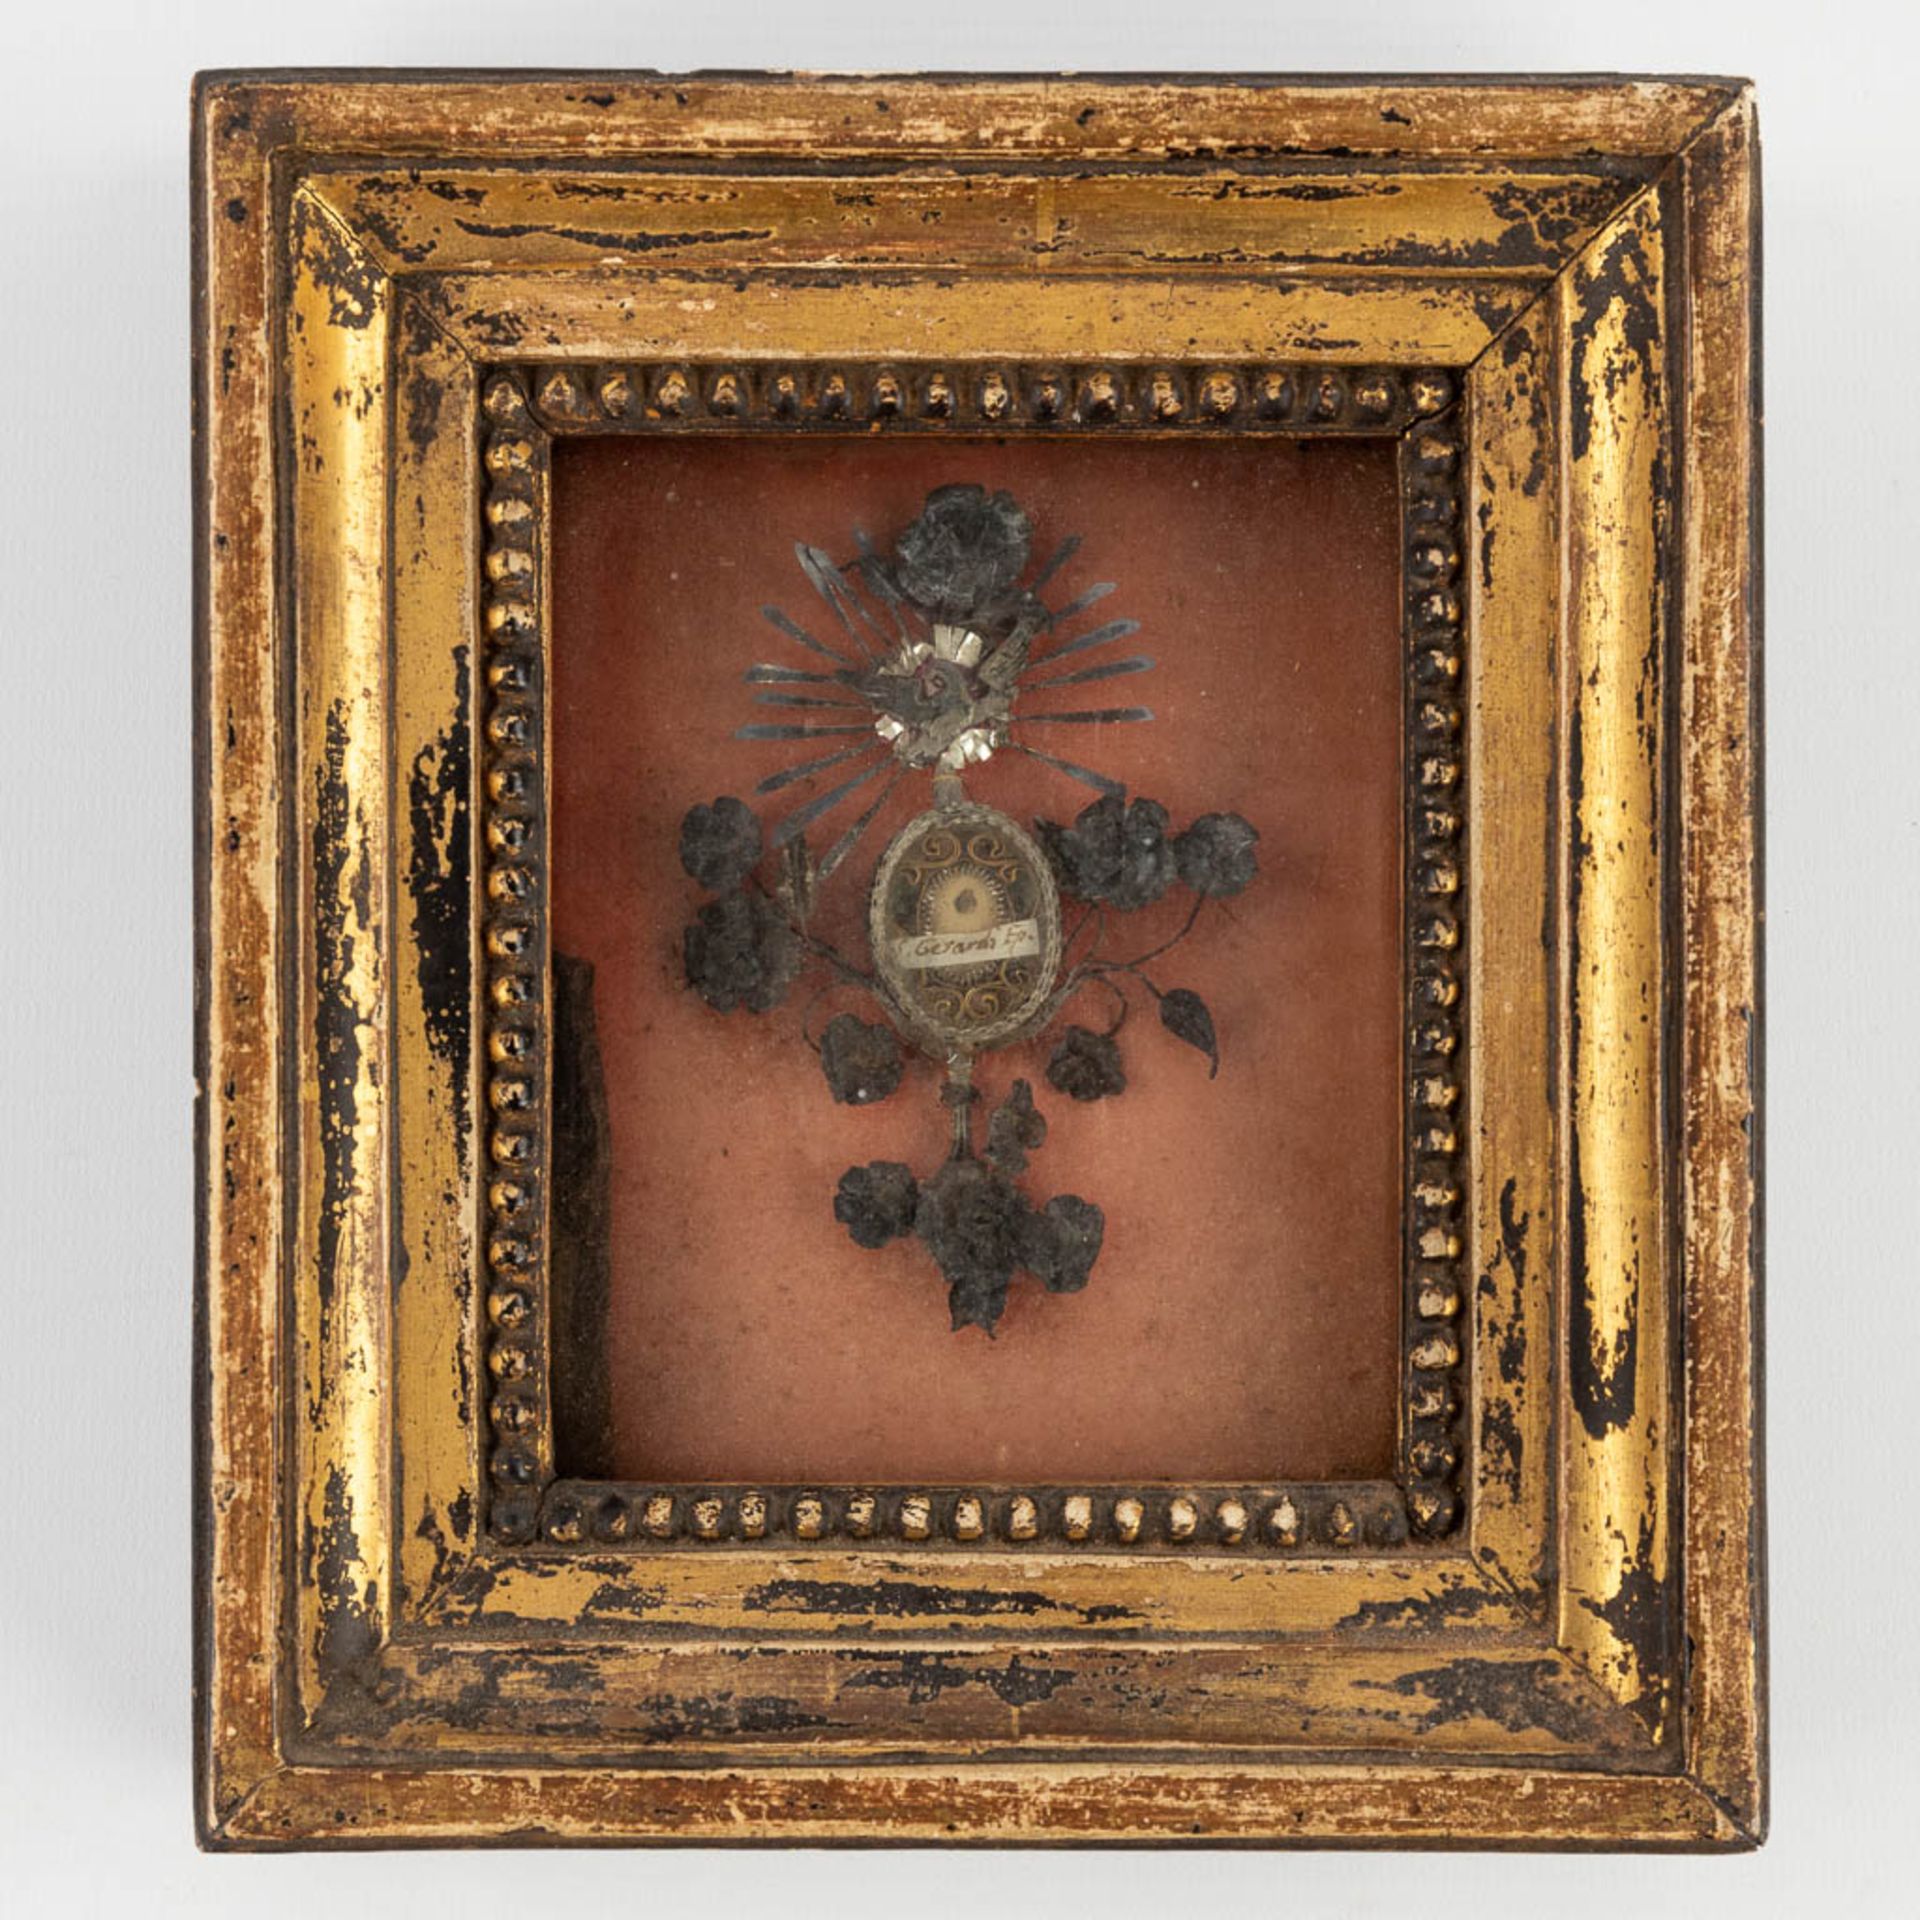 A frame with a sealed theca, a relic for St Gerardi Episcopus. Marked Pope Pius, 1788. (W:19 x H:21,